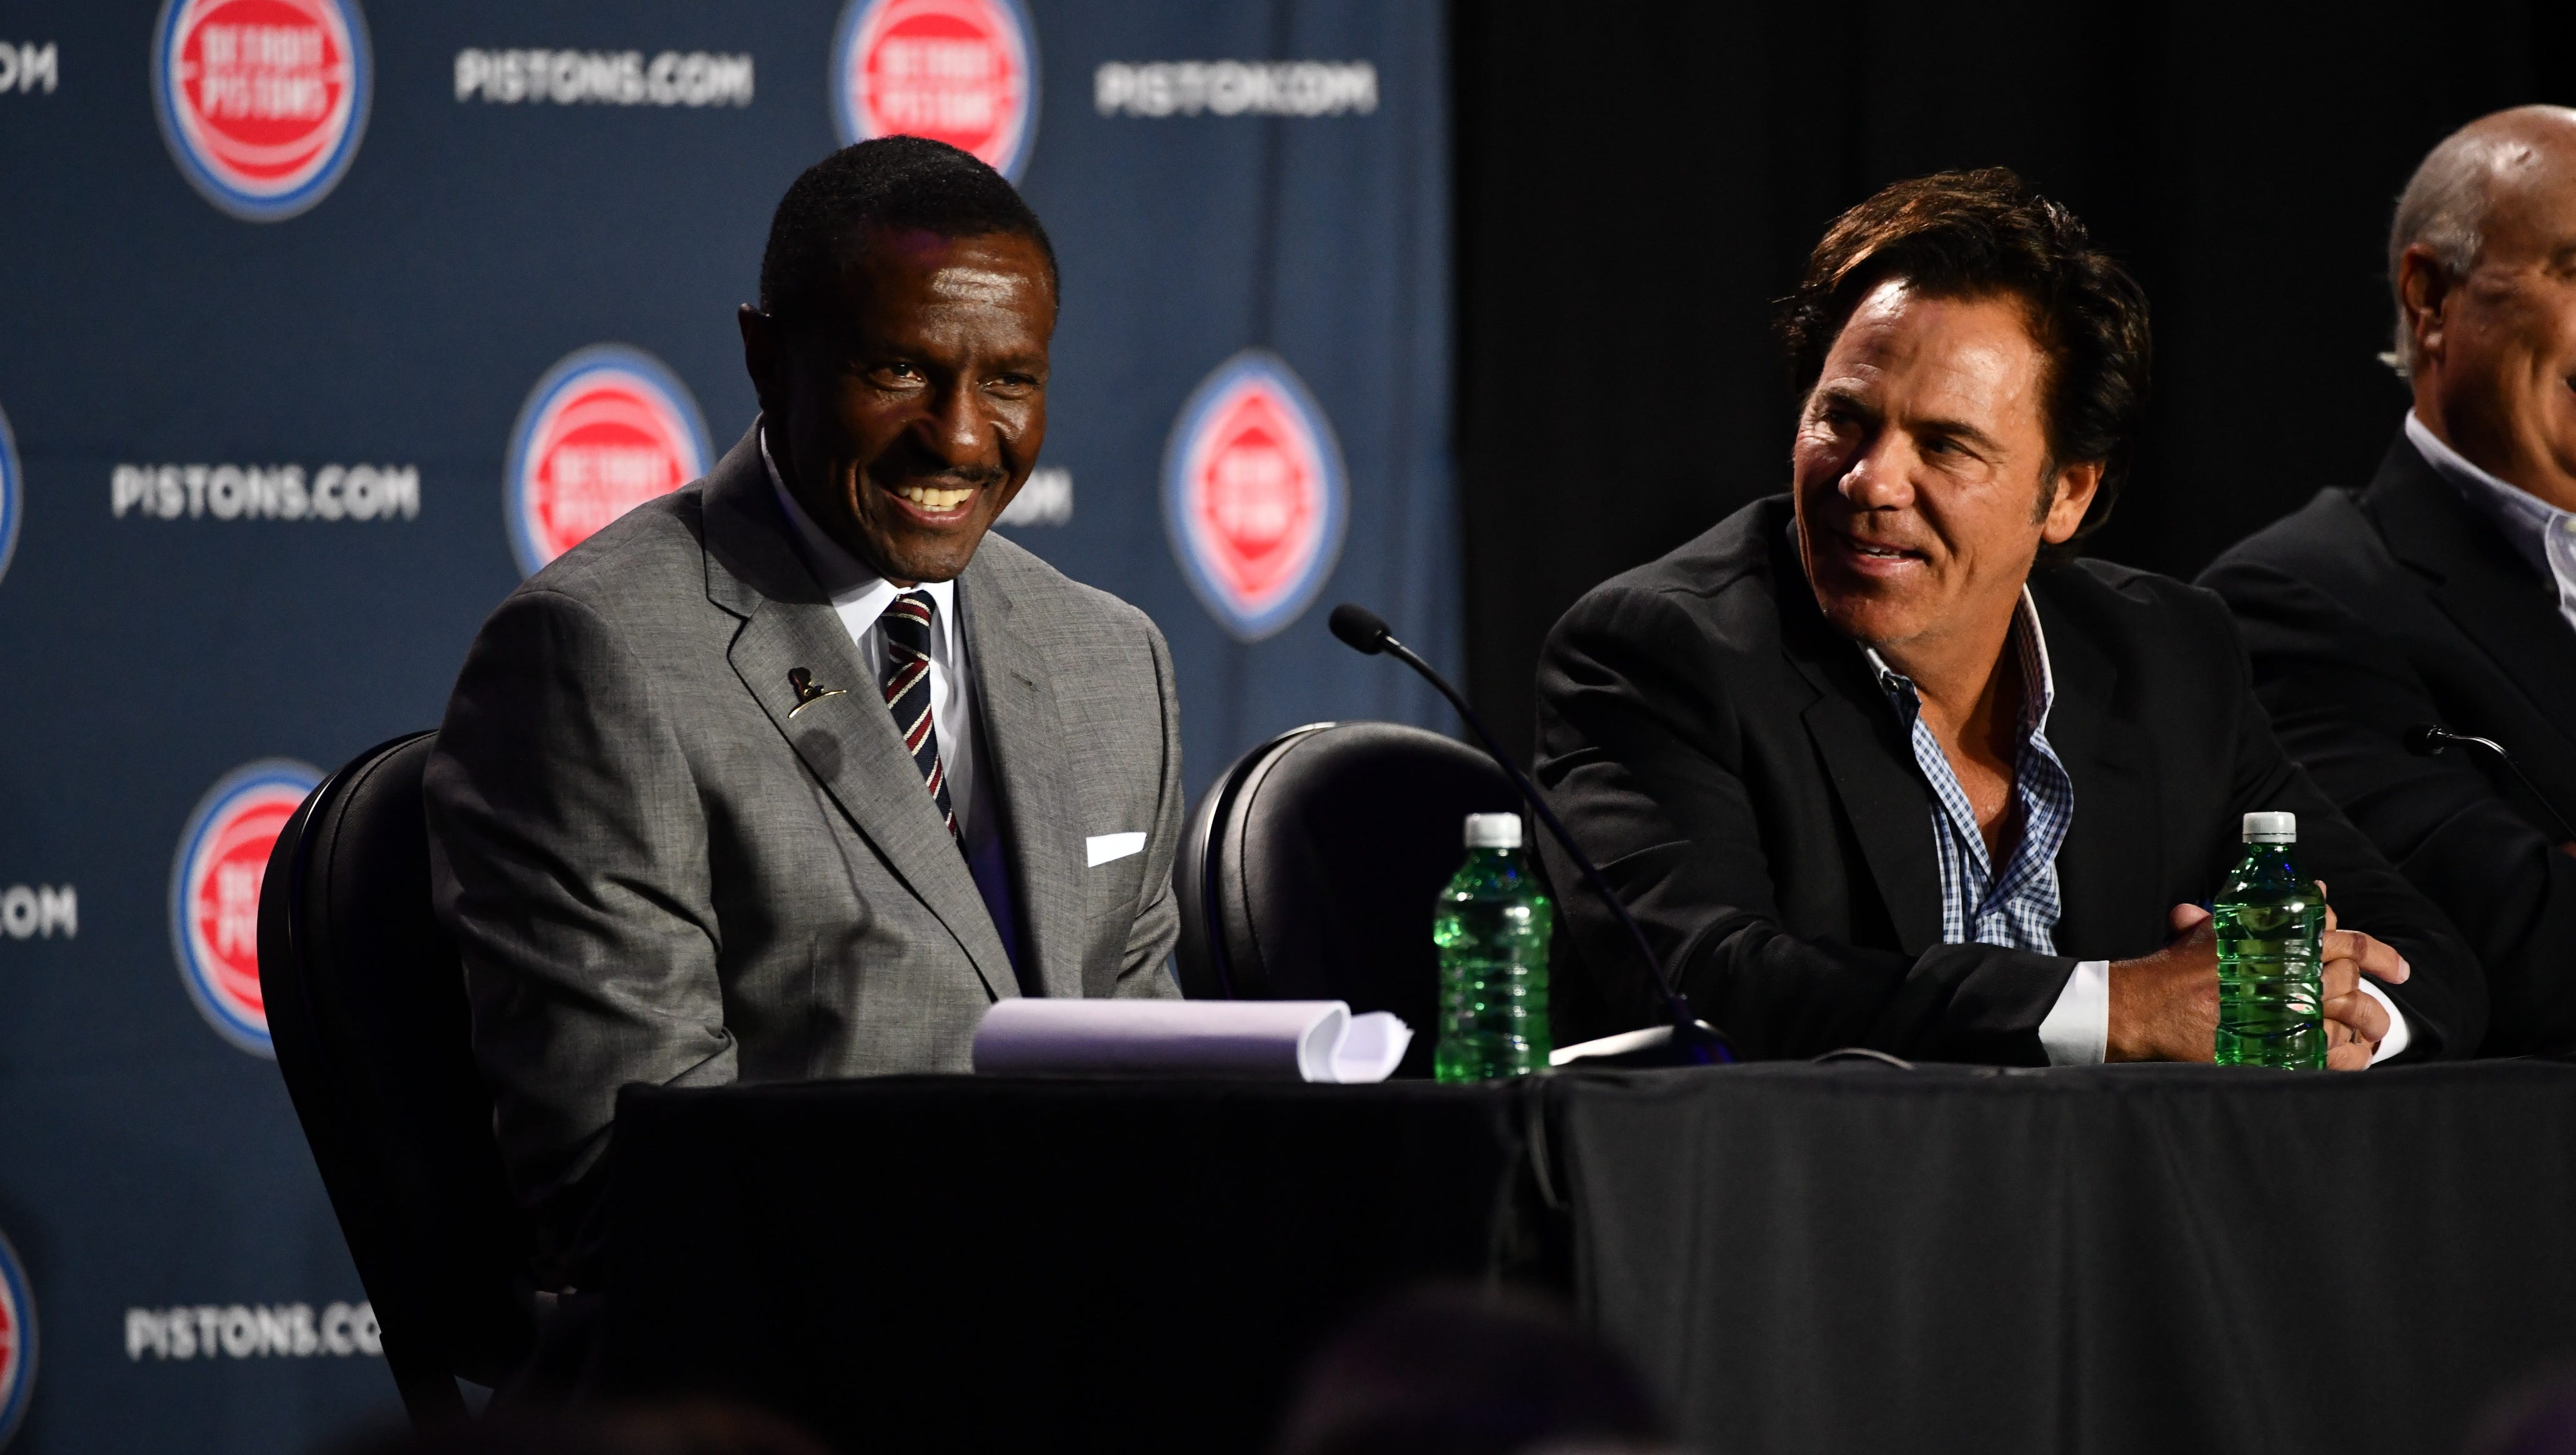 Detroit Pistons team owner Tom Gores, right, helps introduce Dwane Casey as their new head coach Wednesday at Little Caesars Arena in Detroit.